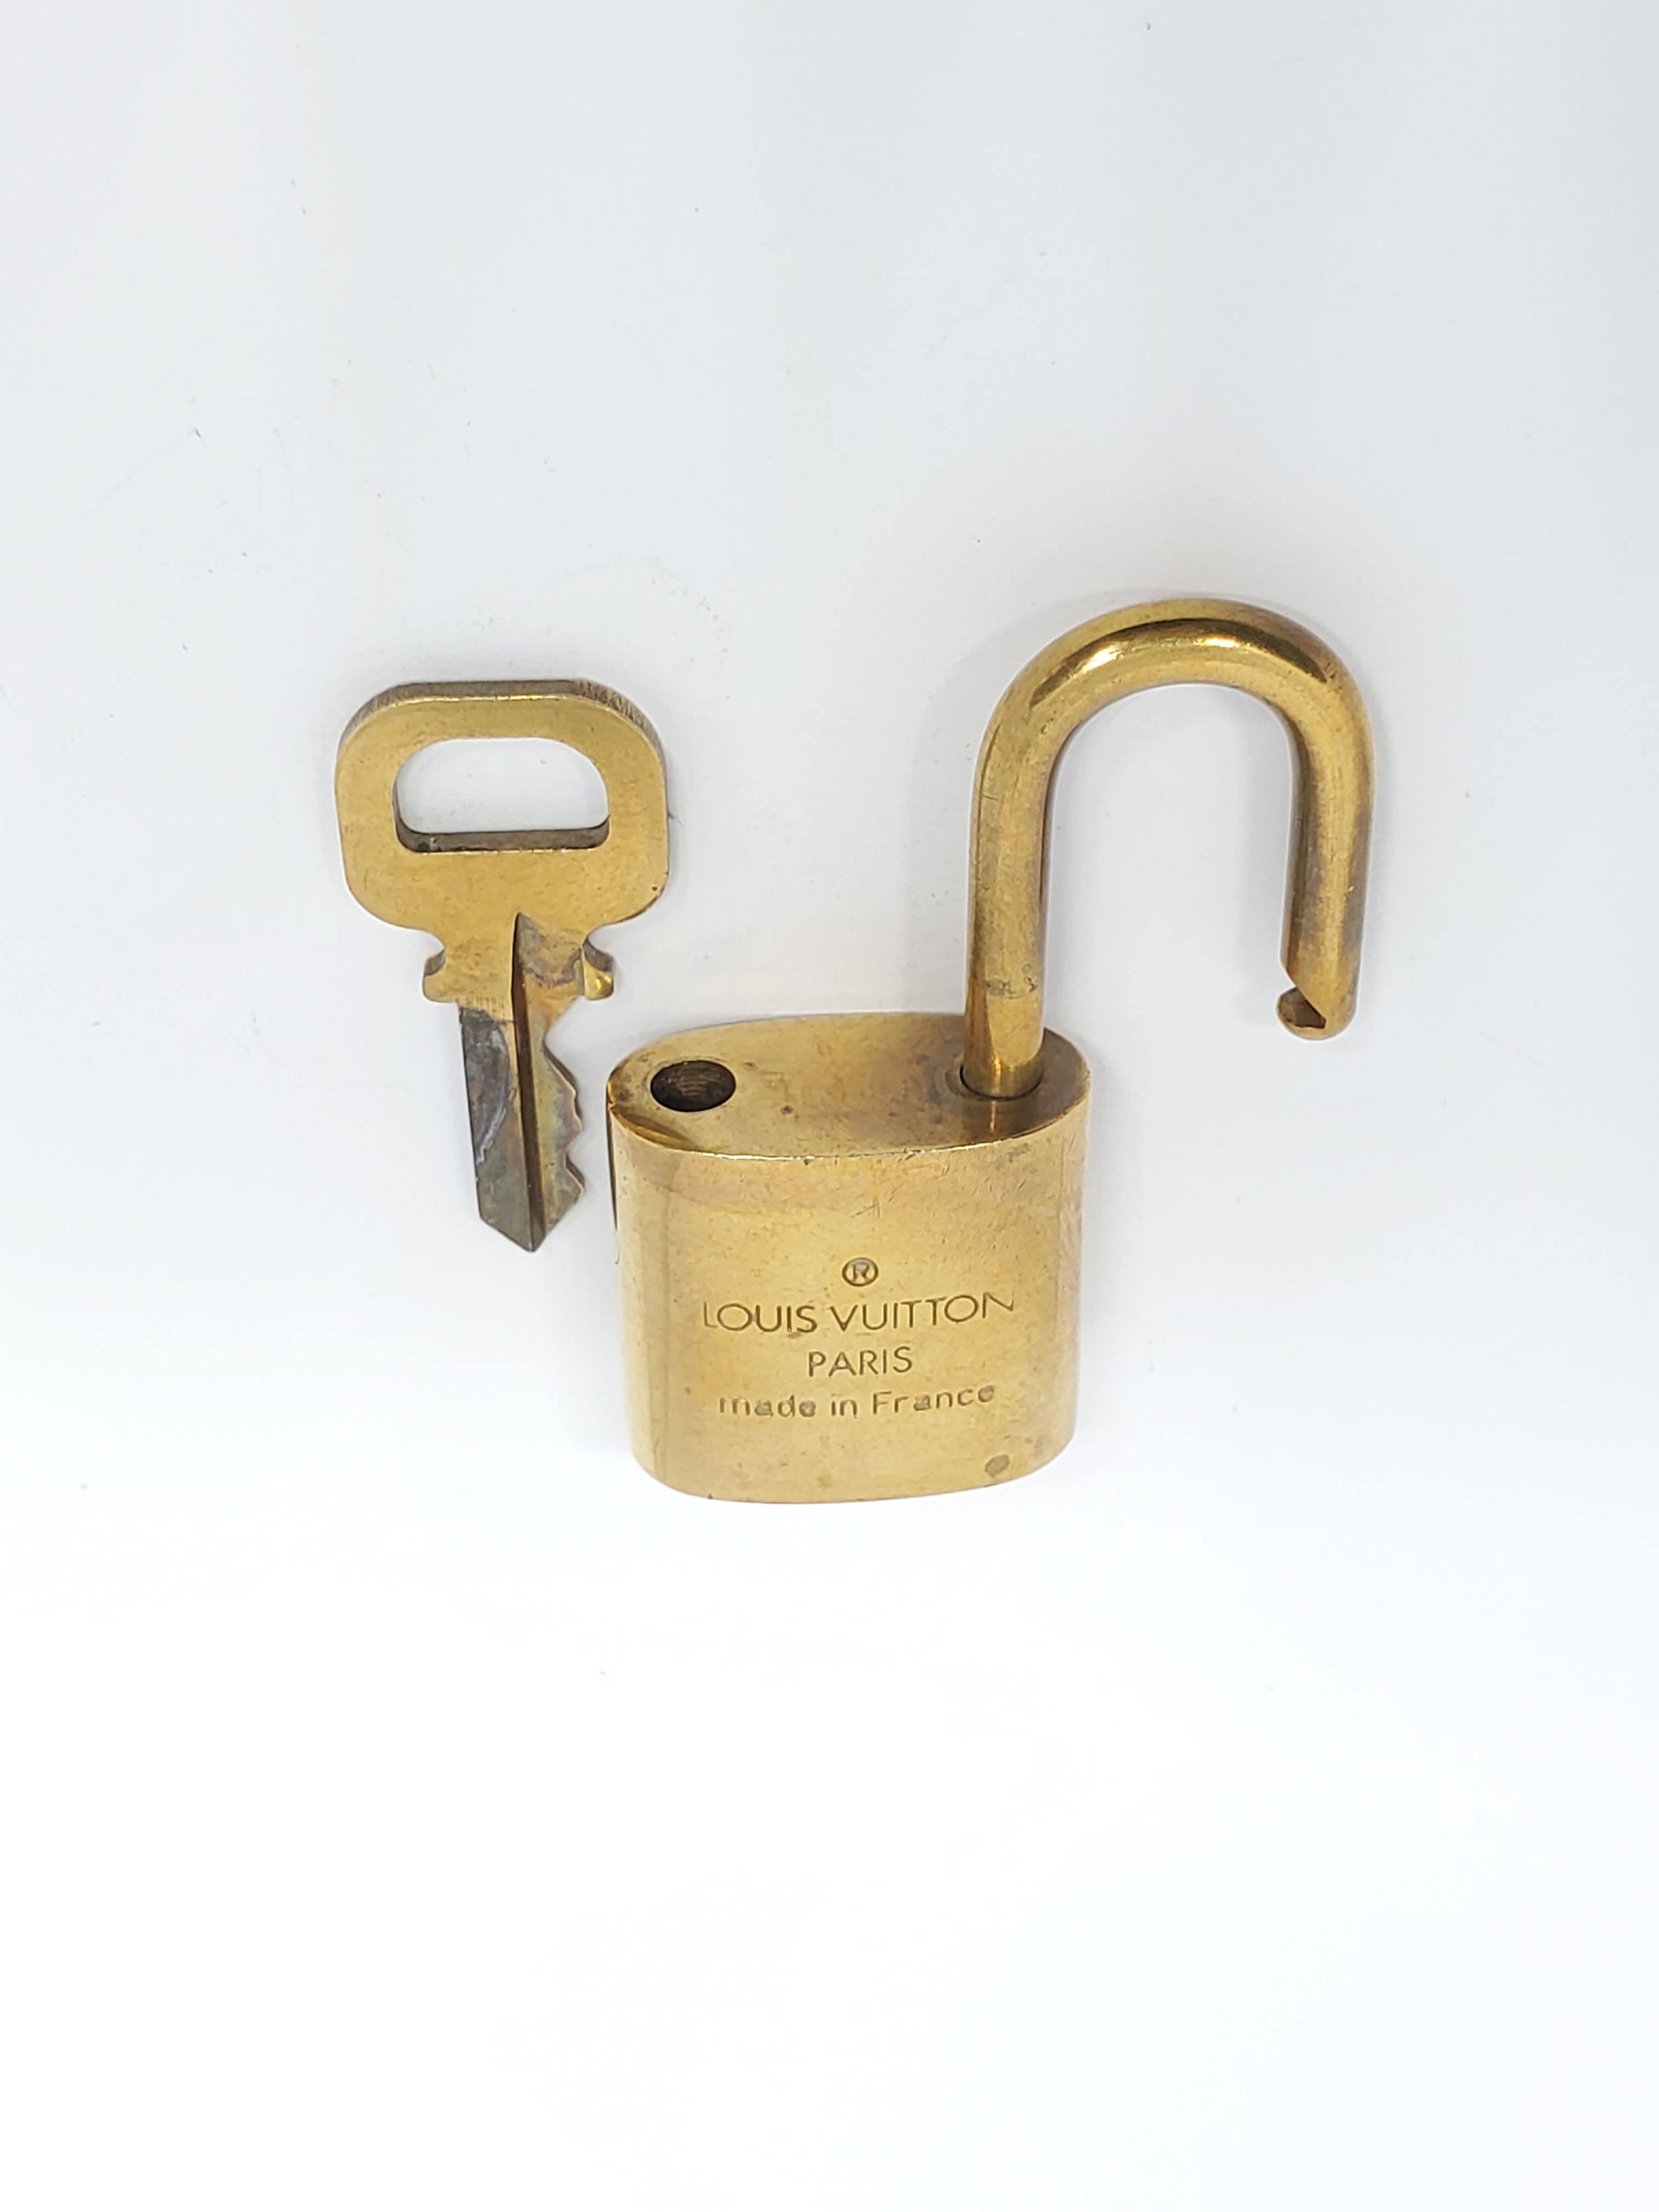 🔐 Gold Louis Vuitton Padlock with Key (Recently Polished)